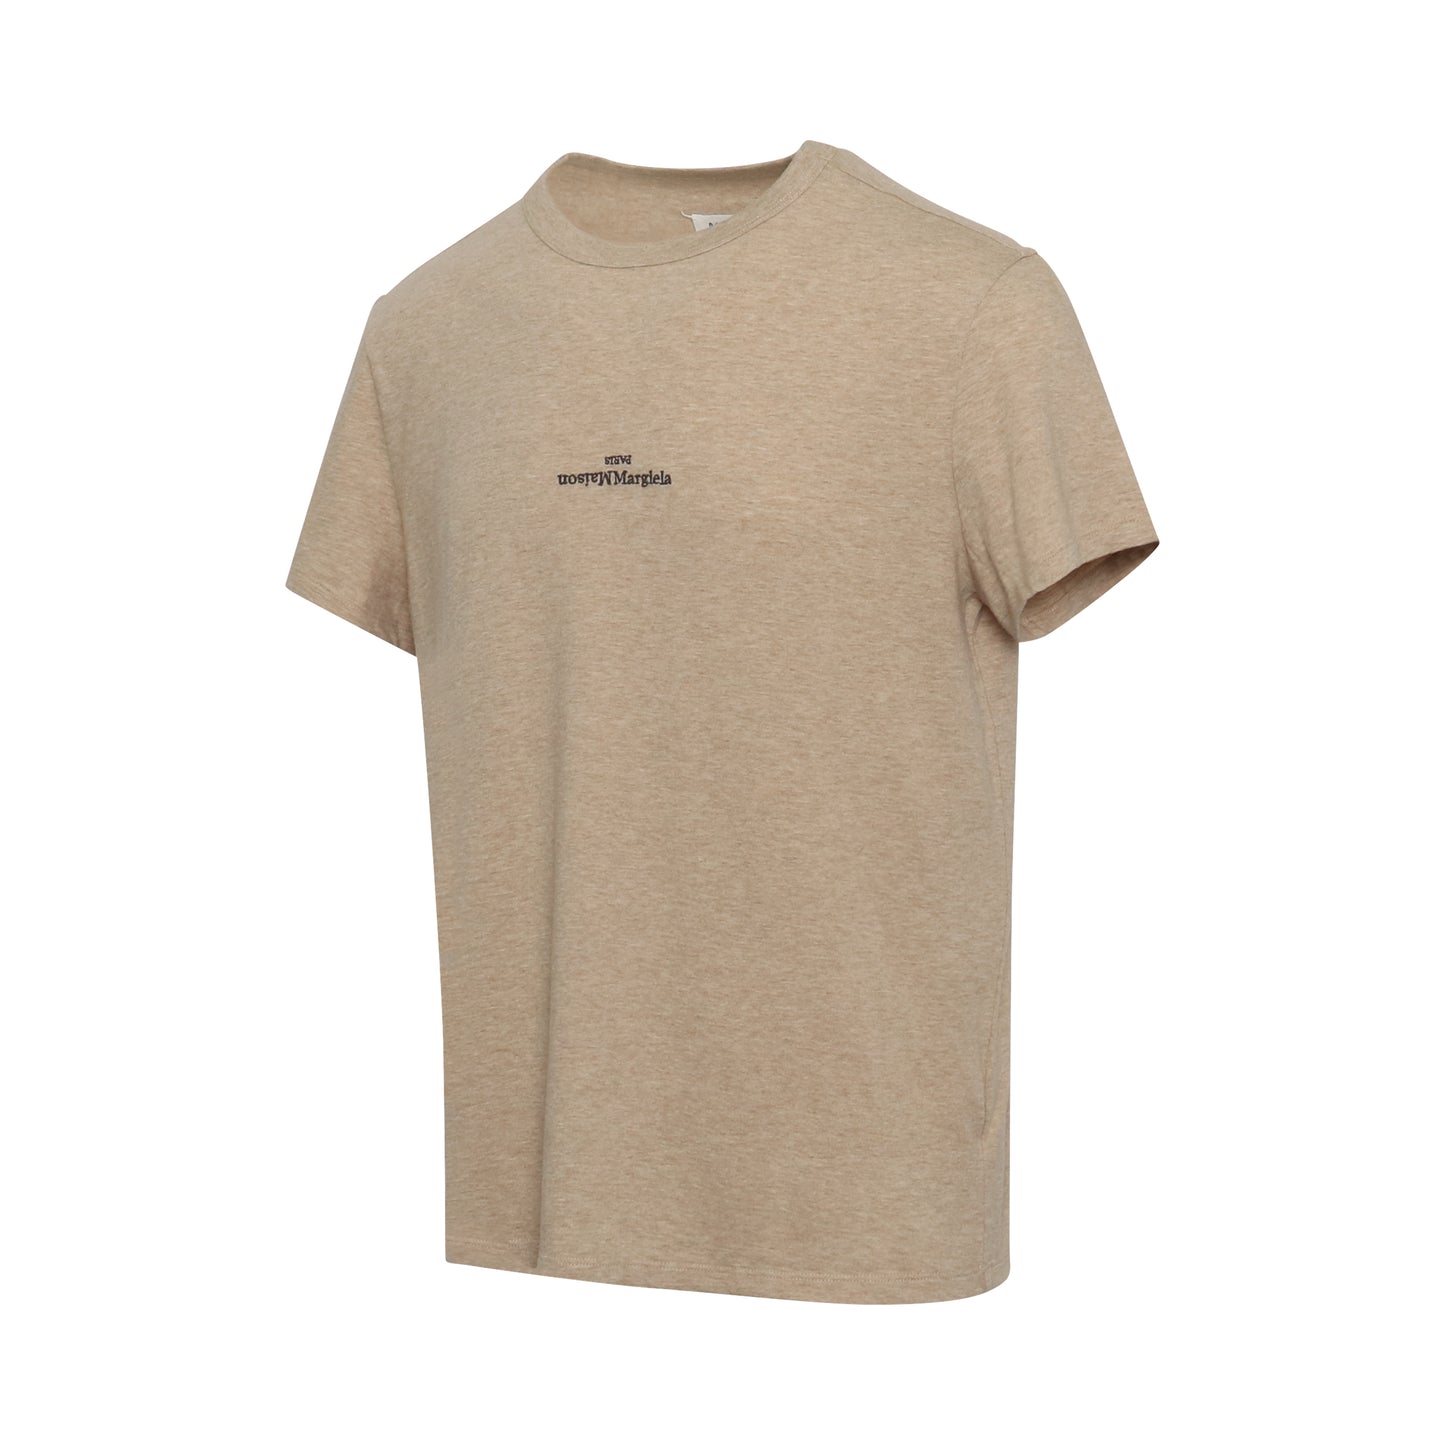 Embroidered Logo T-Shirt in Beige